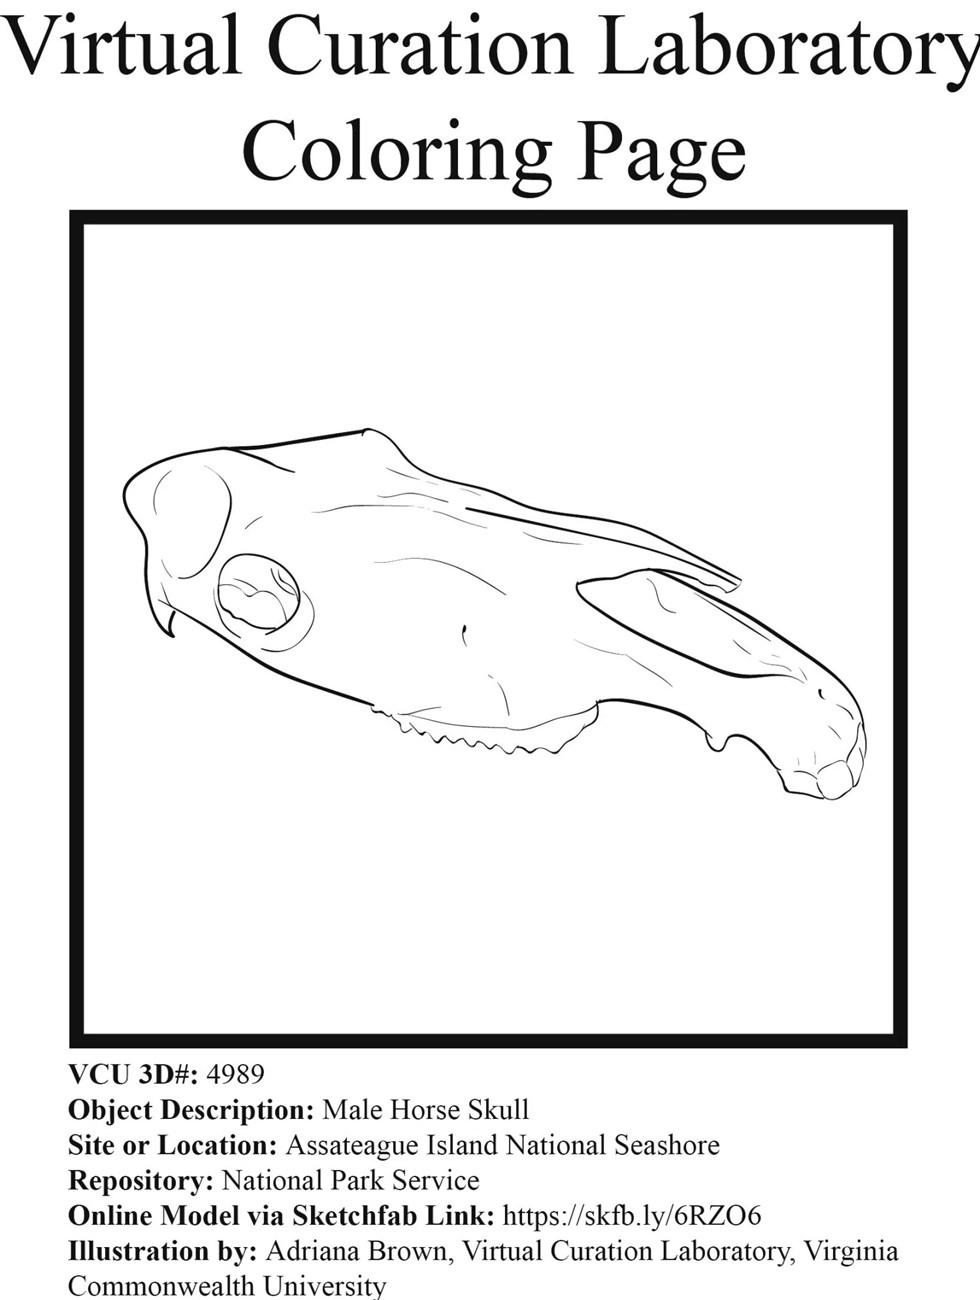 Line drawing of horse skull